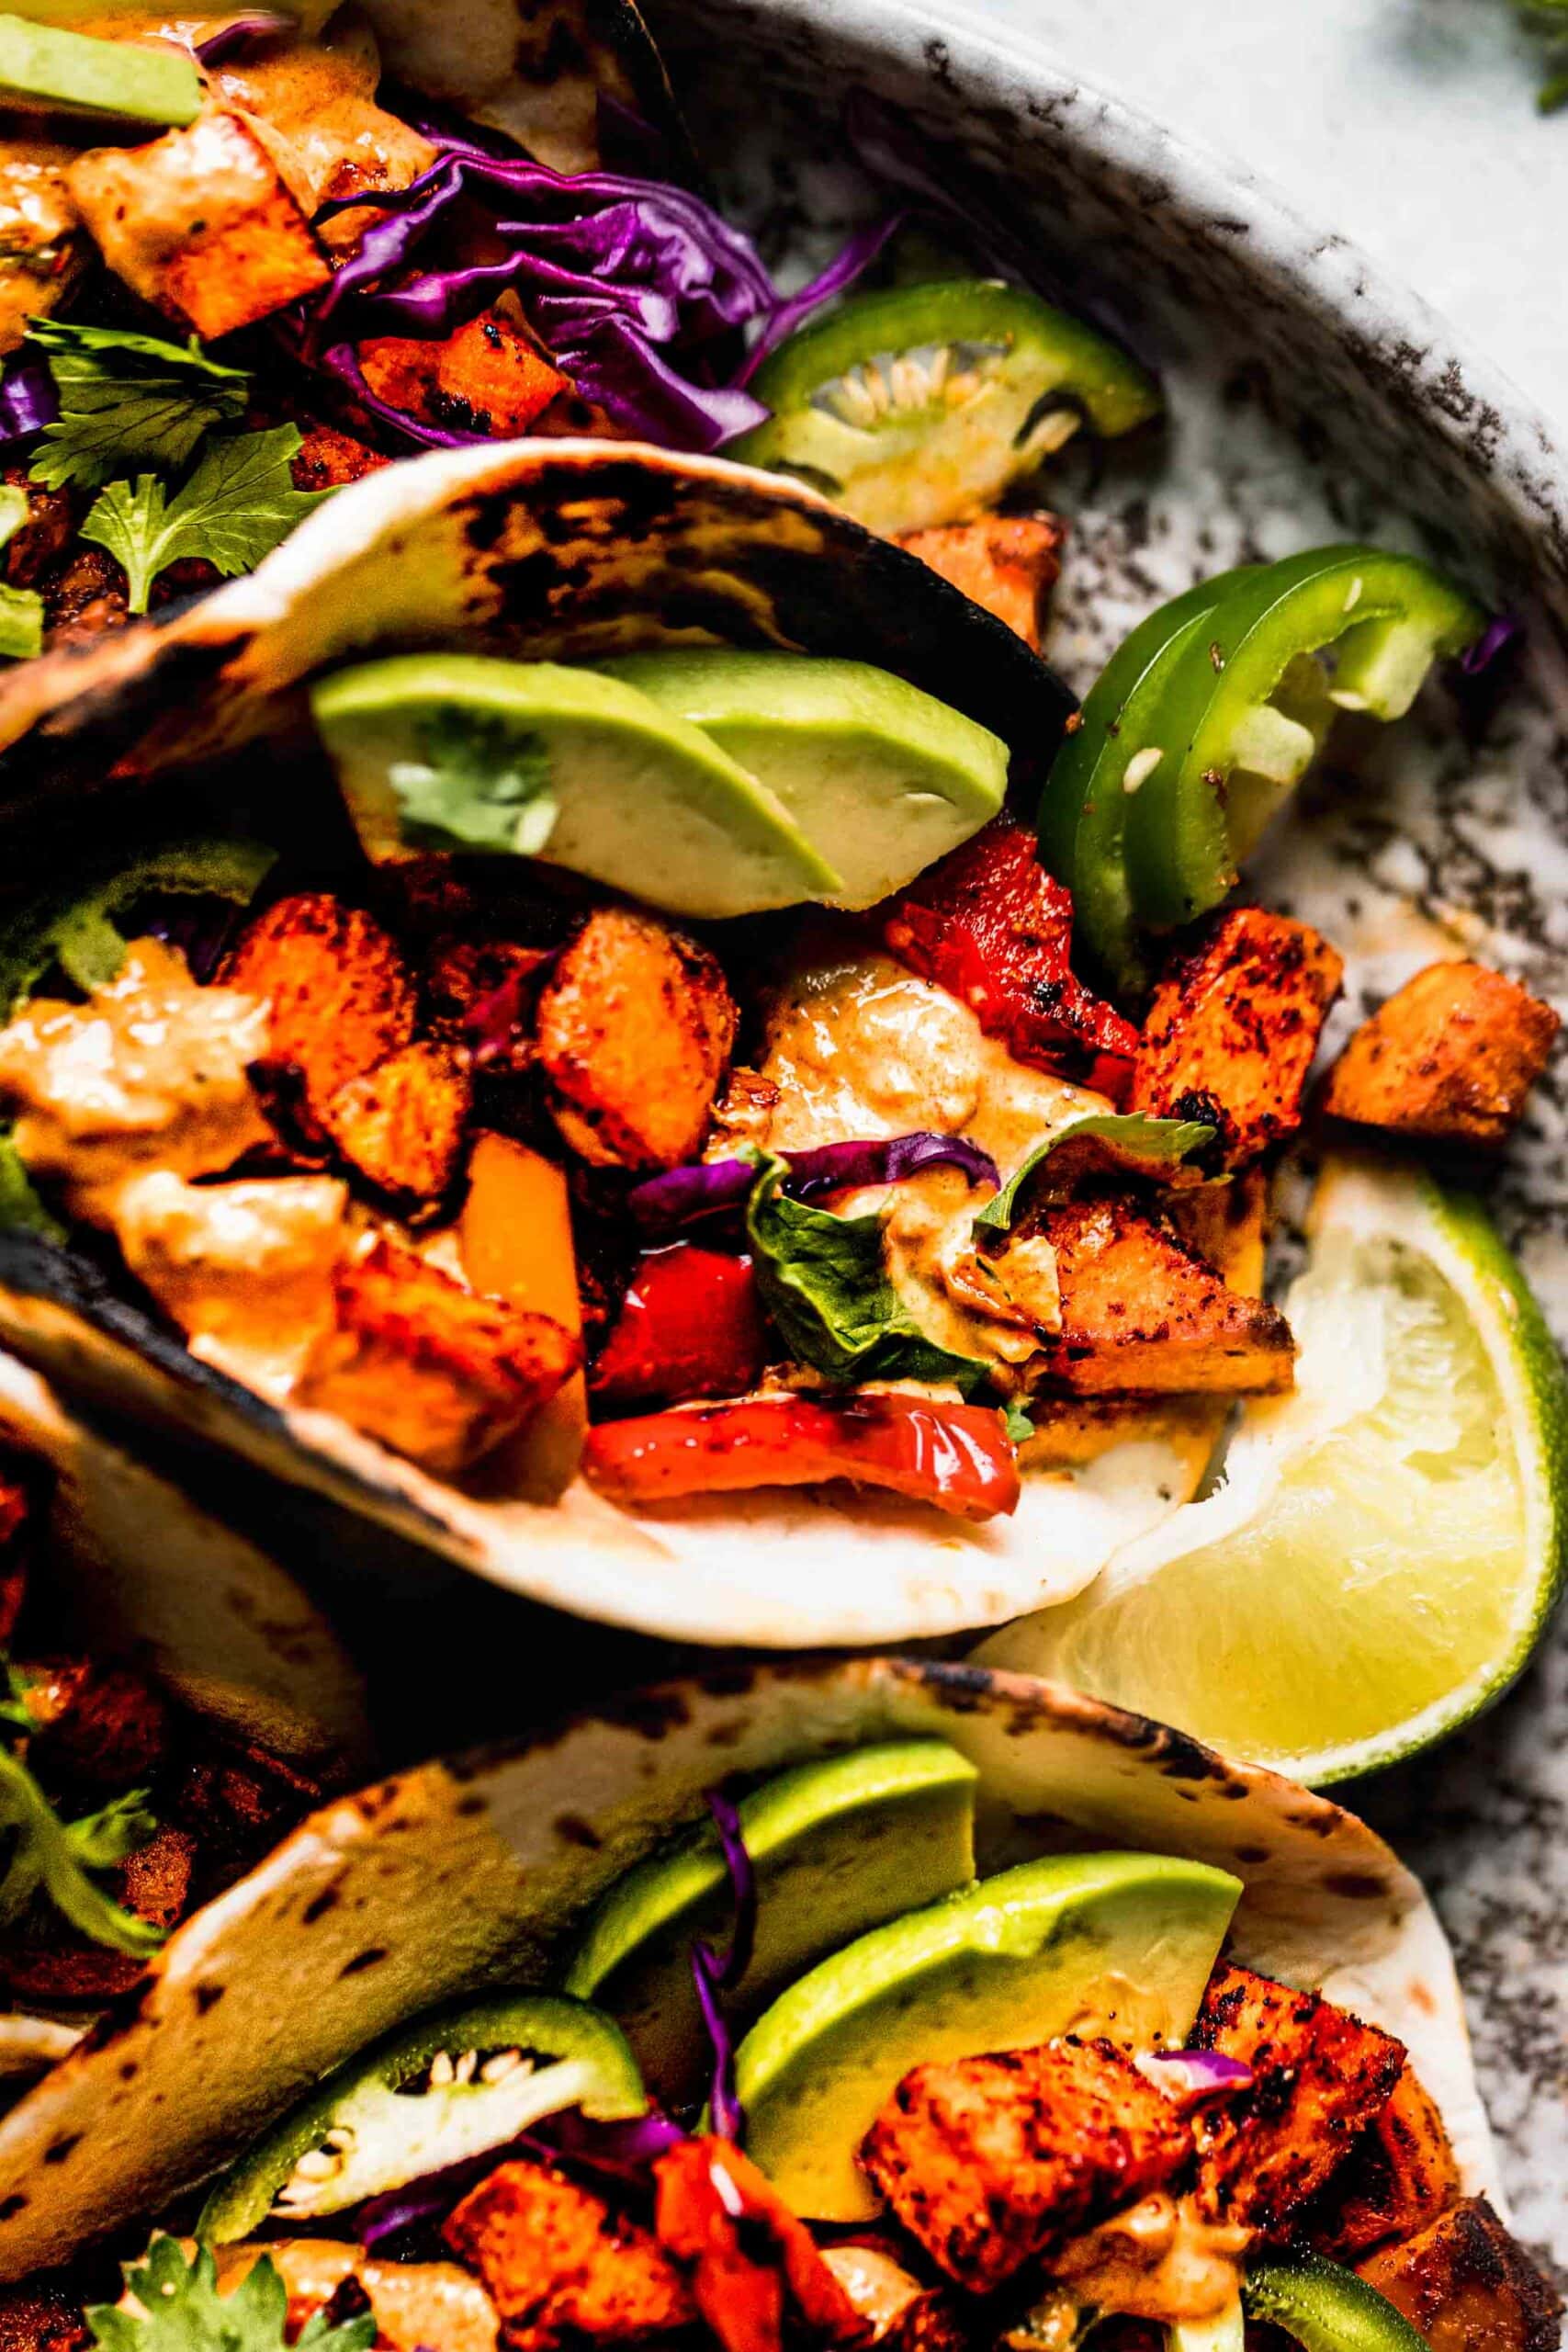 Sweet potato tacos arranged on a plate with crema and avocados.